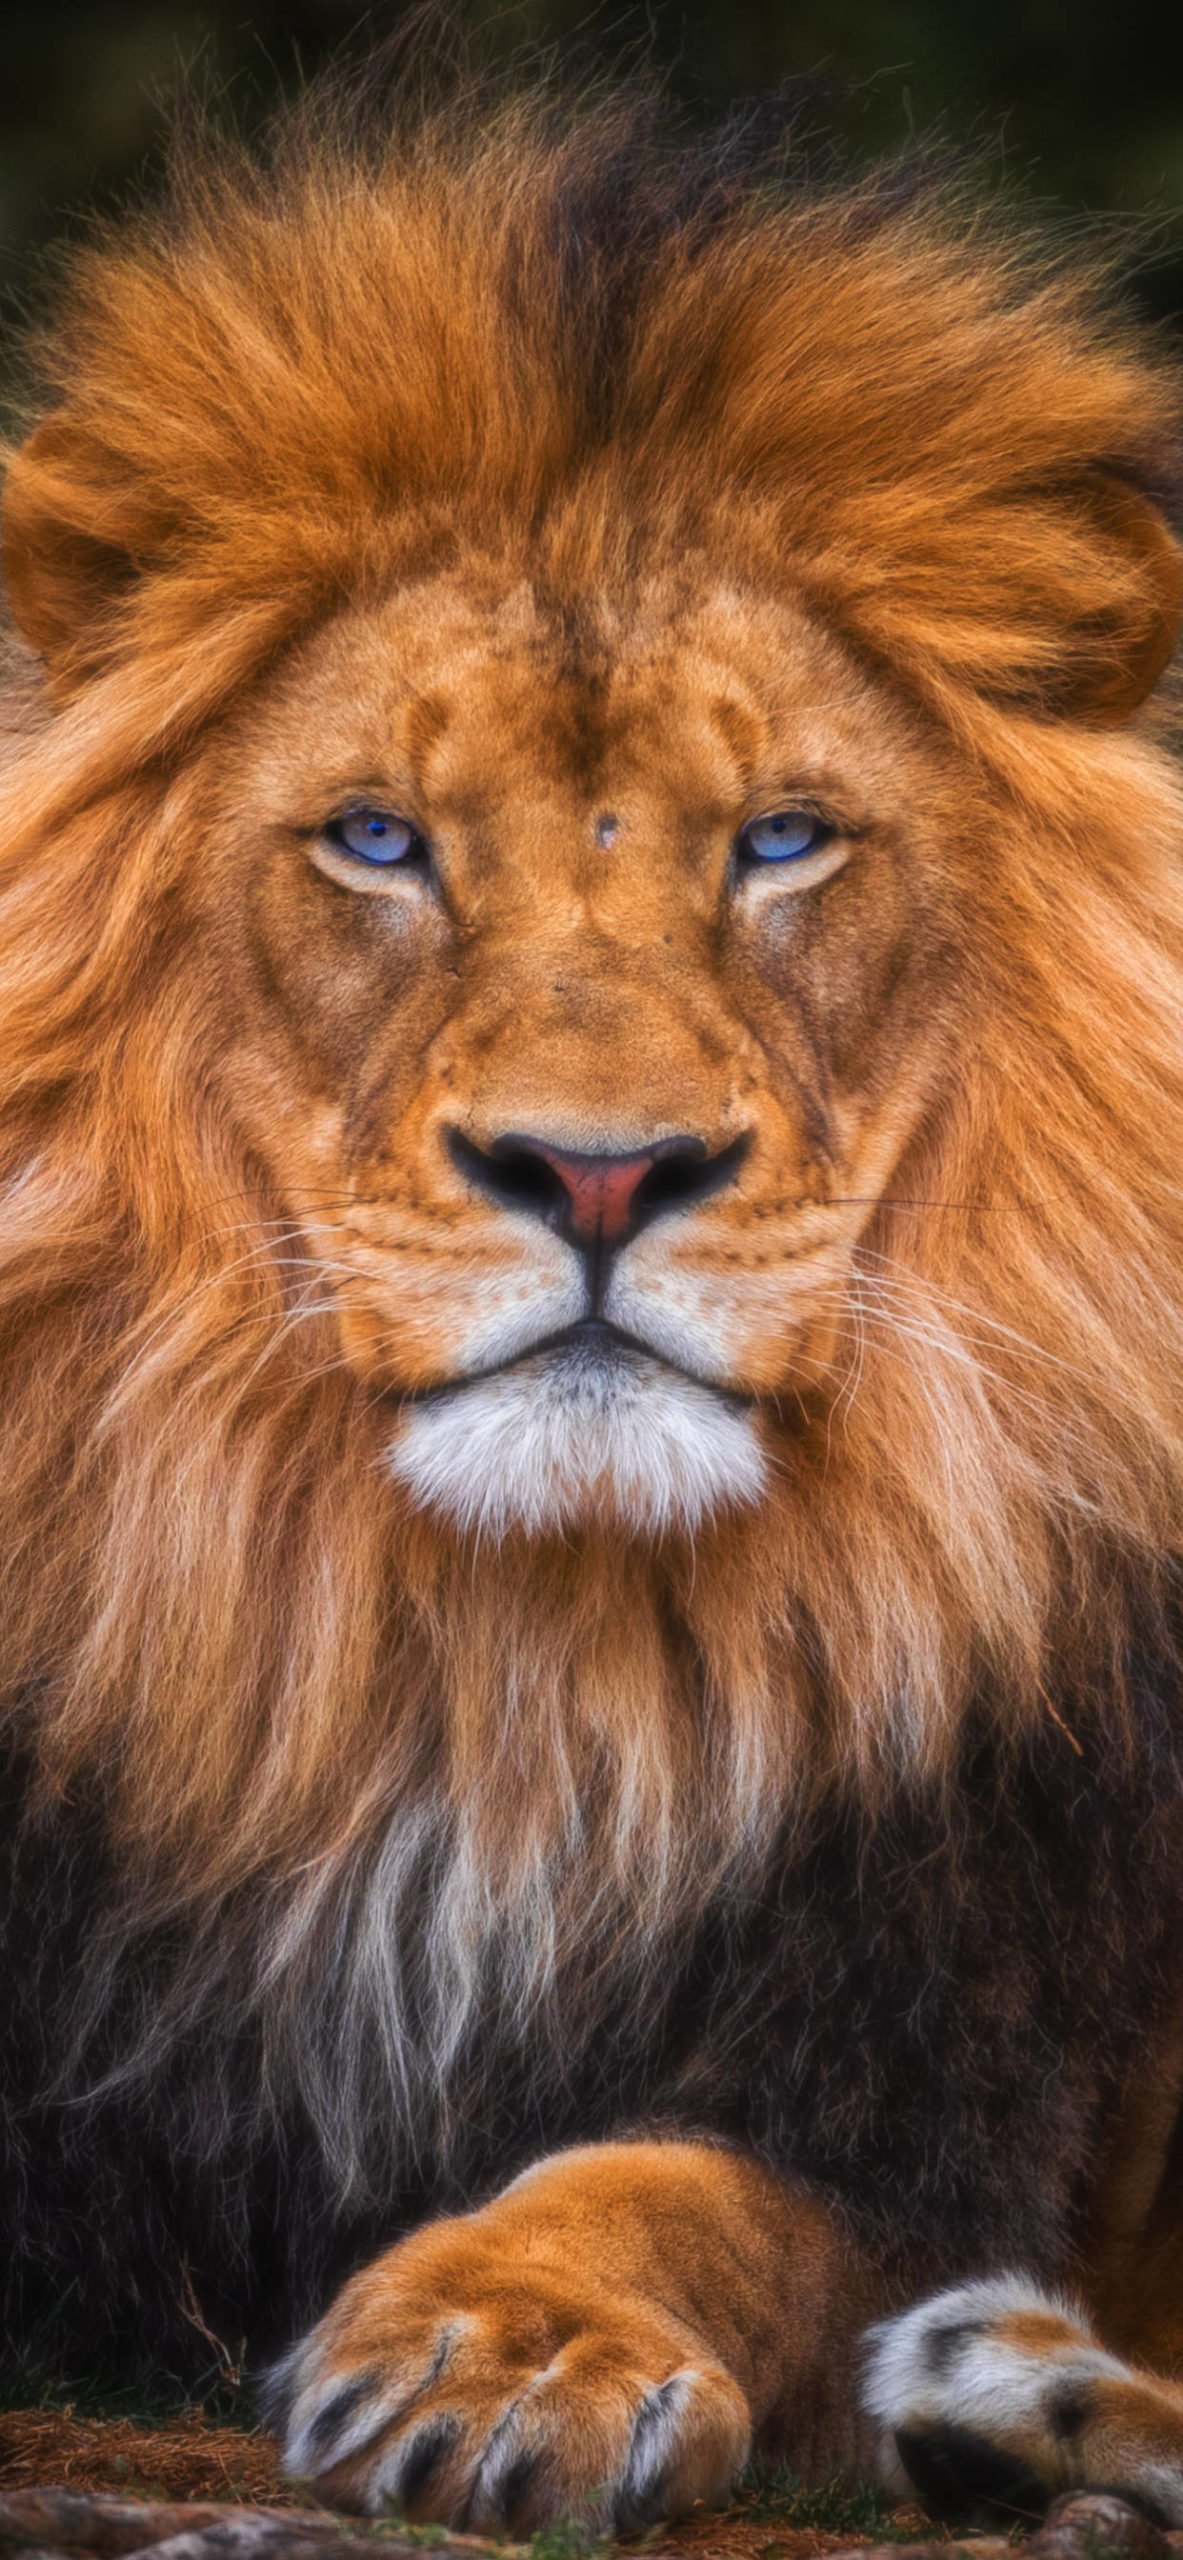 Lion Wallpaper for iPhone Pro Max, X, 6